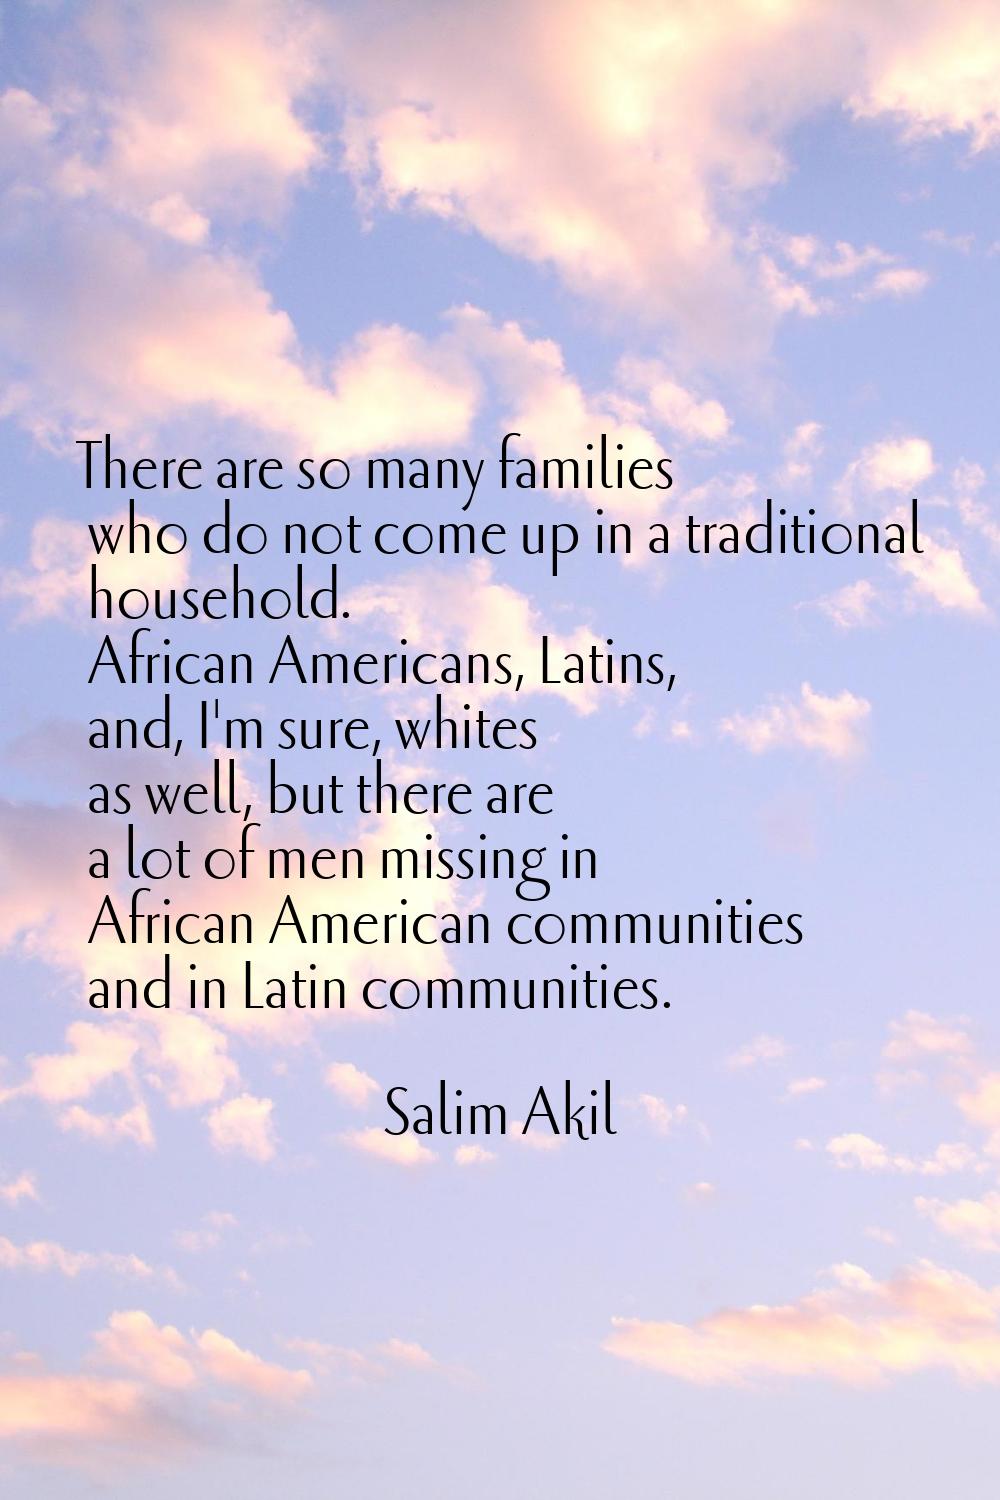 There are so many families who do not come up in a traditional household. African Americans, Latins